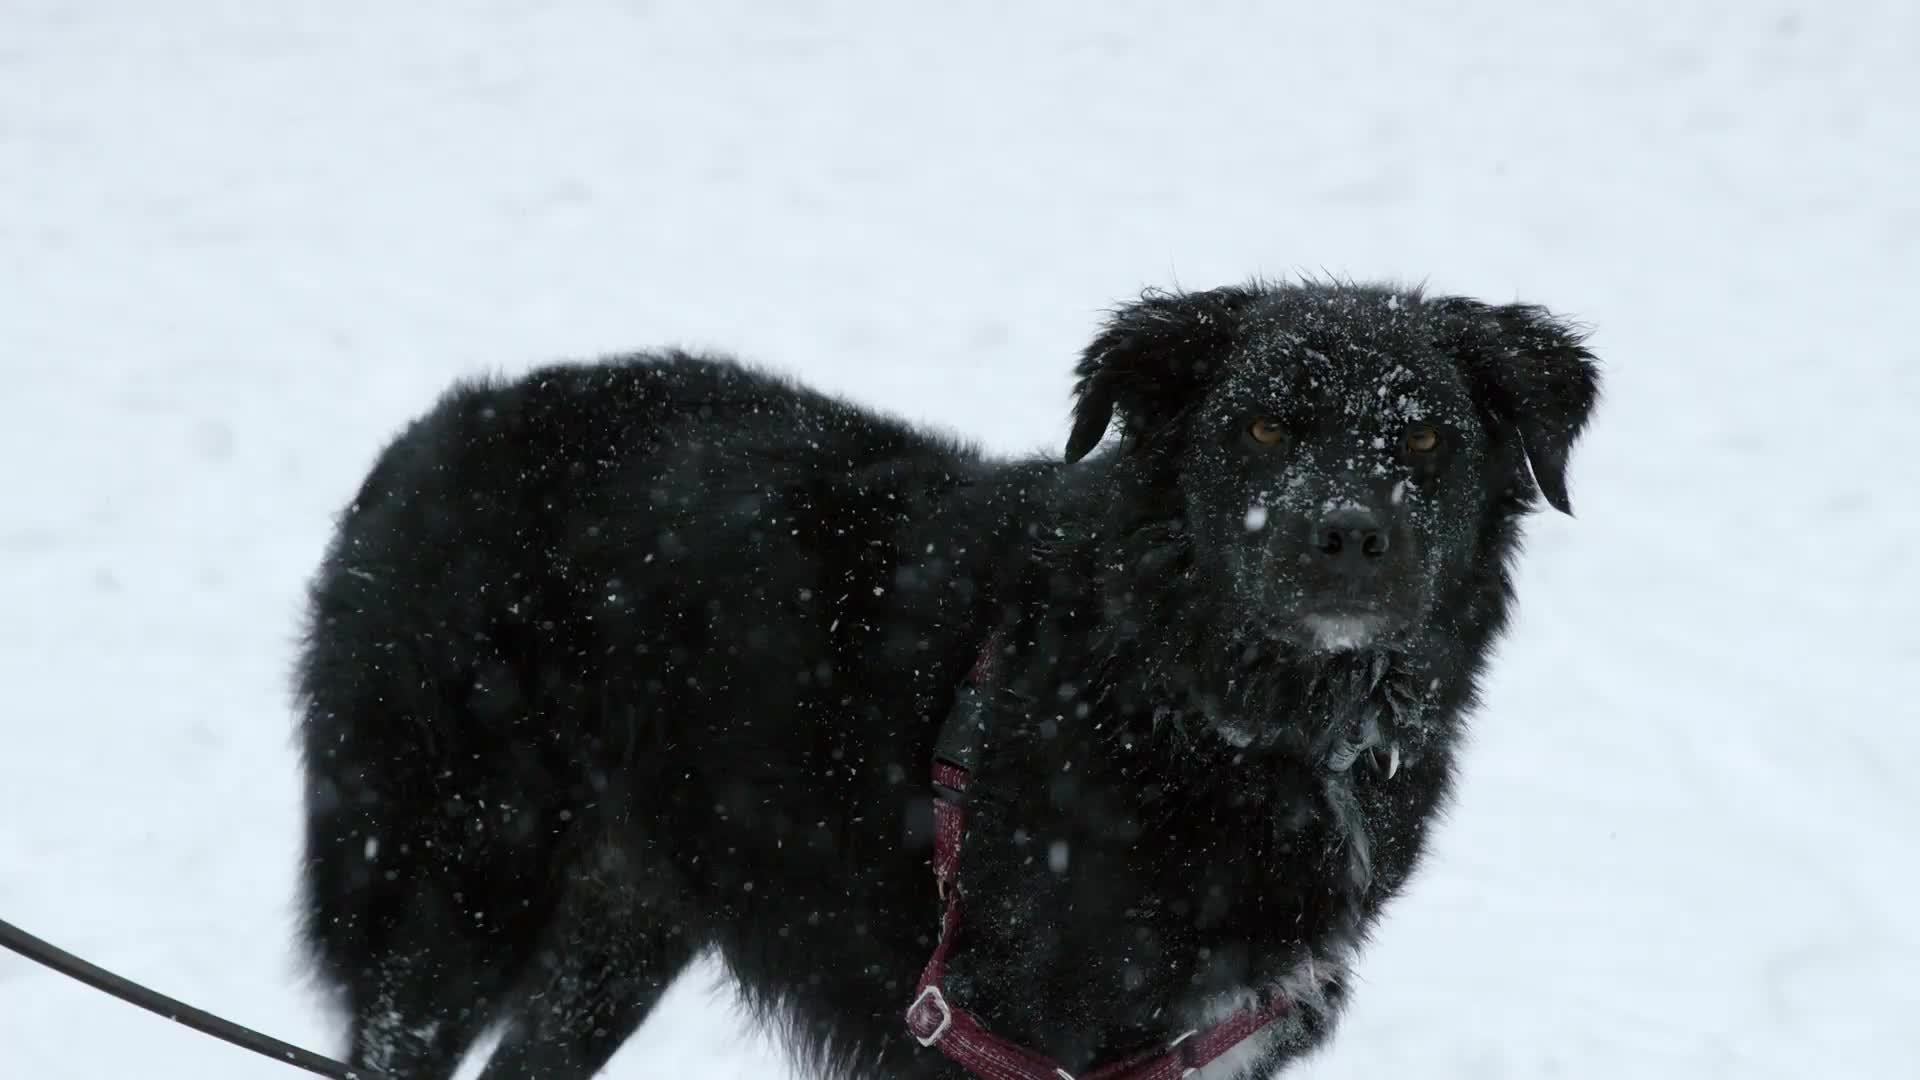 black border collie shaking off in winter snow storm blizzard - snowing on dog in NYC